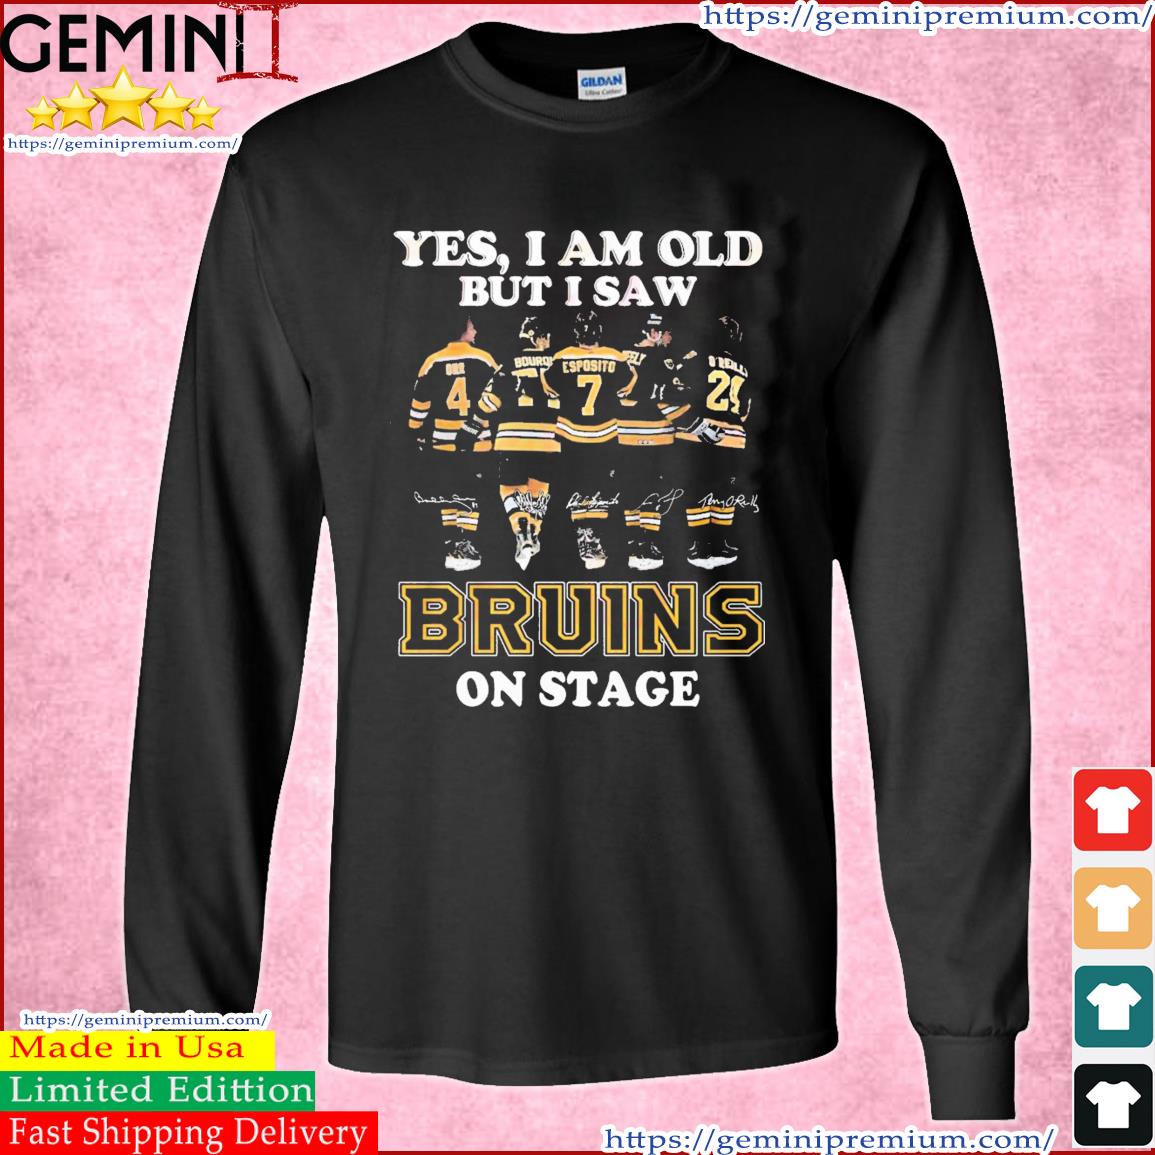 Yes, I Am Old But I Saw Bruins Team On Stage T-Shirt Long Sleeve Tee